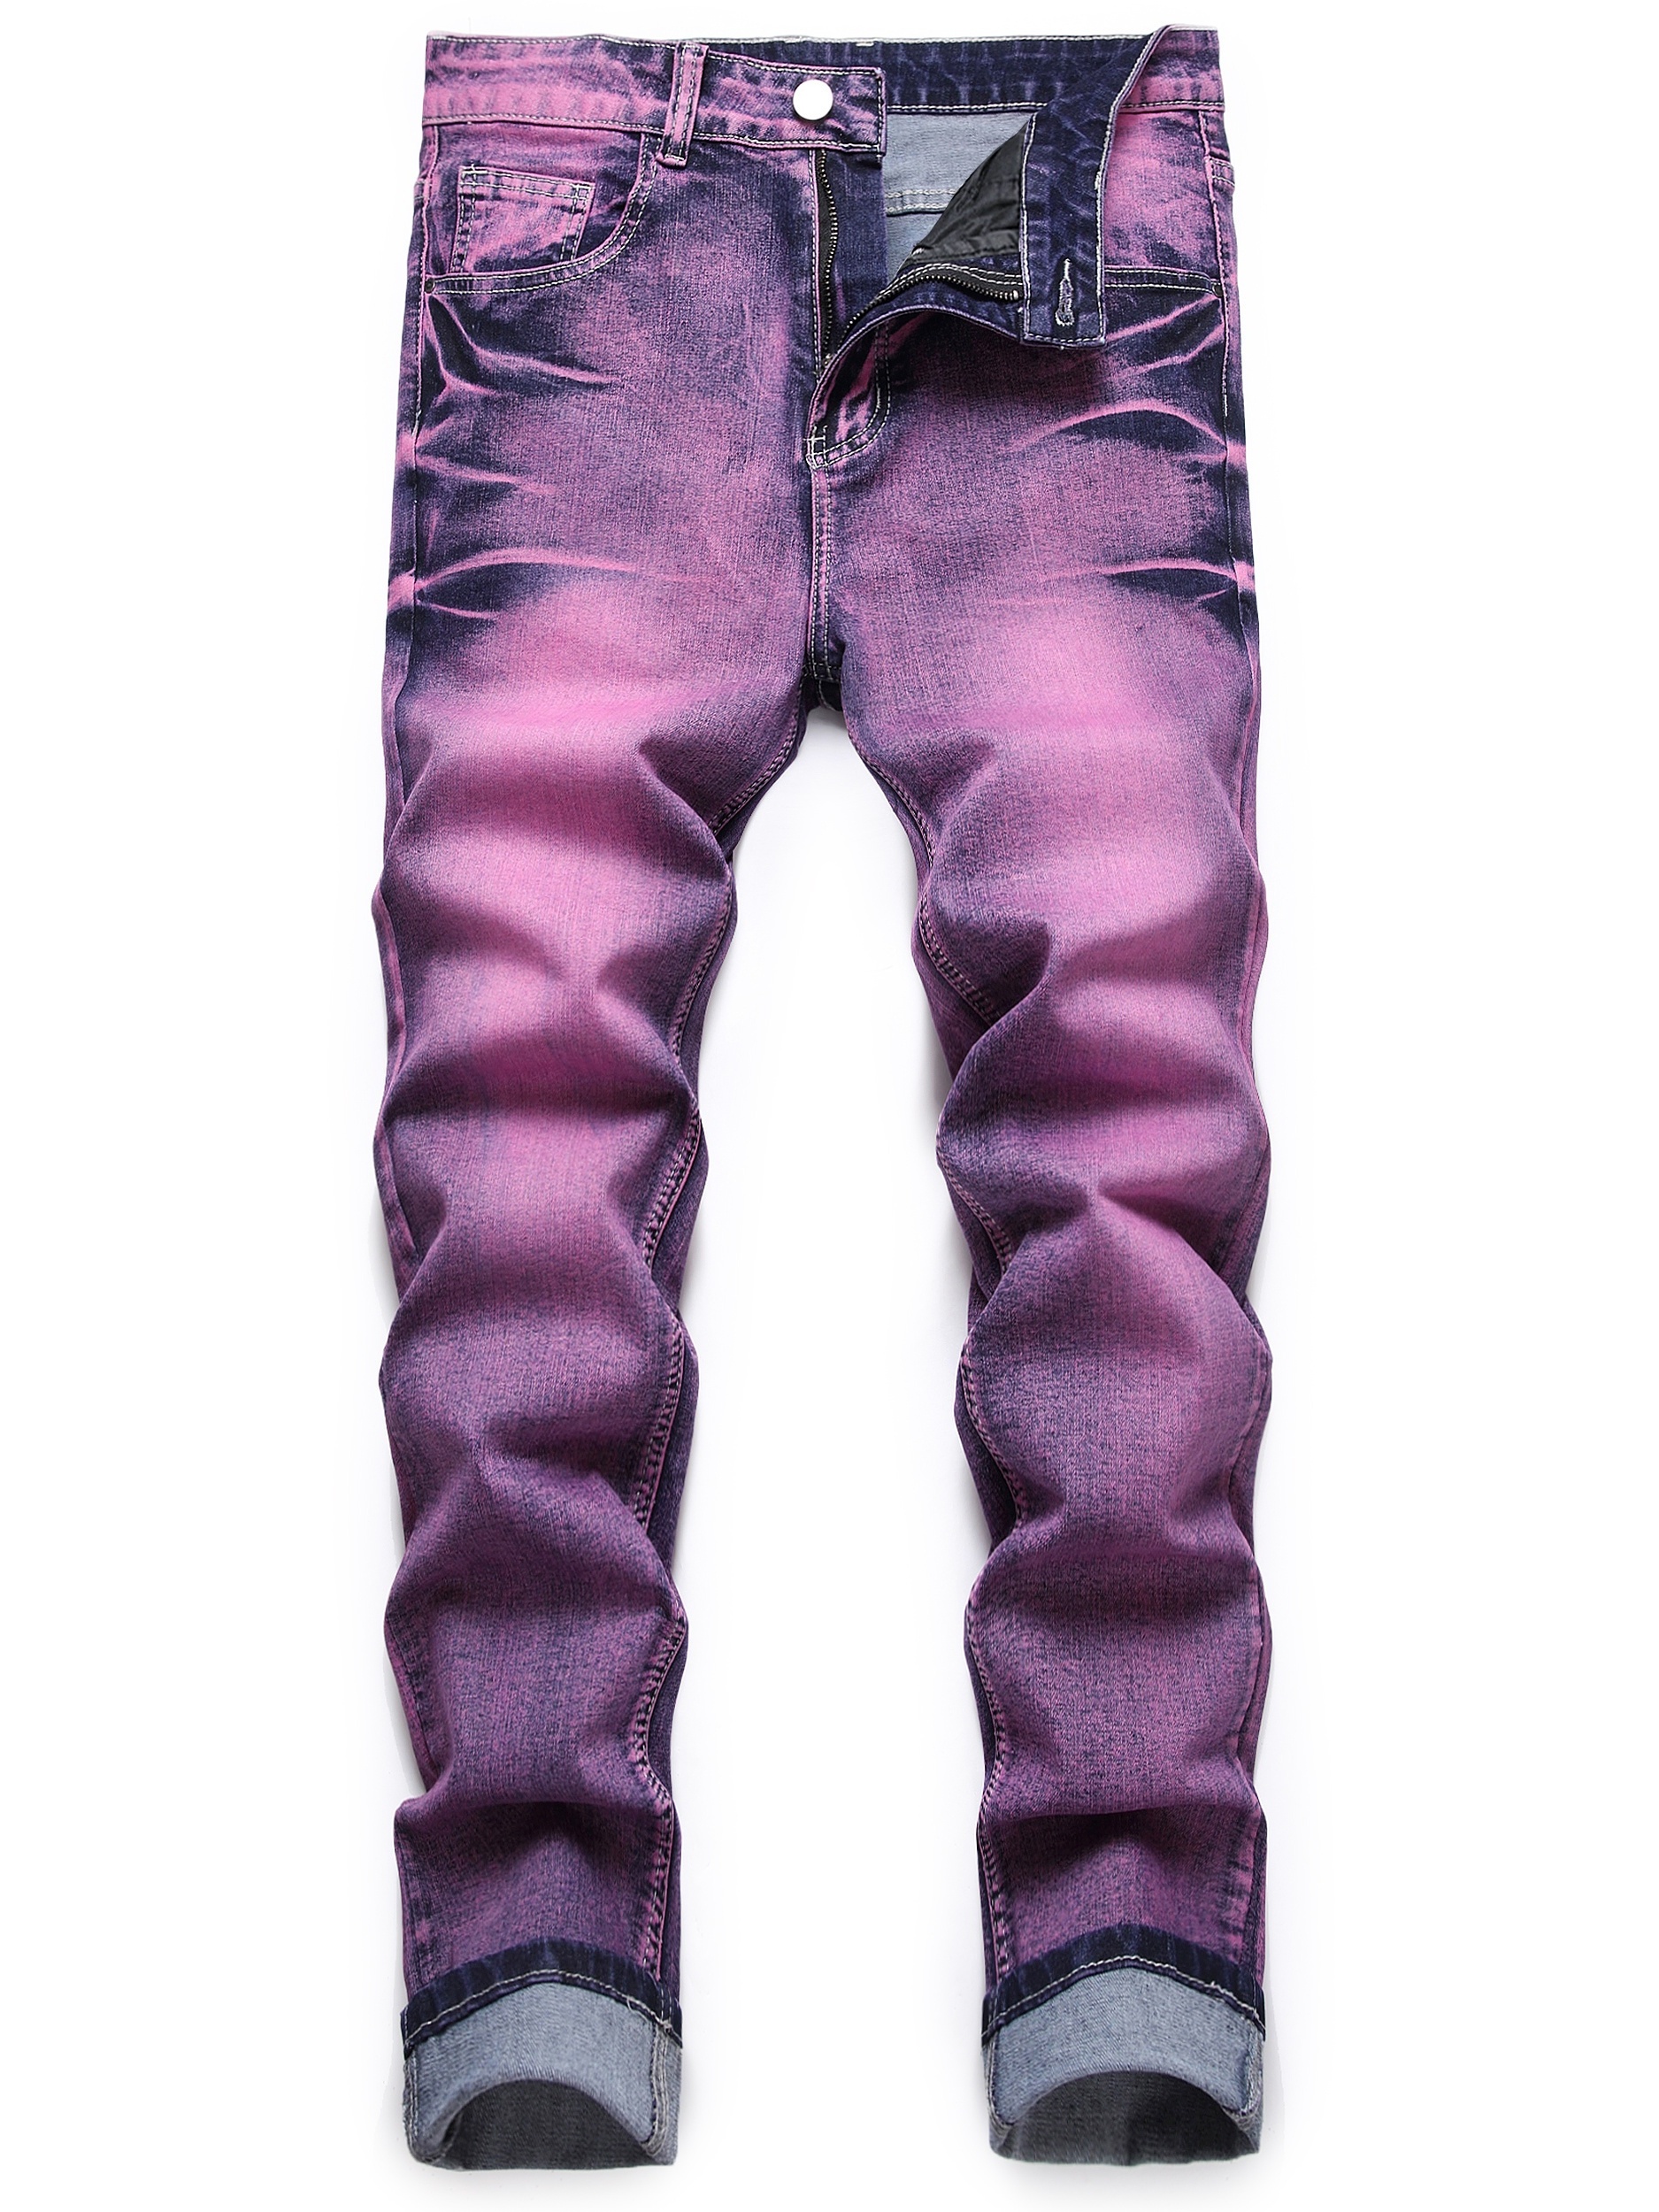 Designer Distressed Purple Jeans For Men And Women Fashionable Ripped Denim  Cargo Denim Jeans Mens For Bikers And Black Outfits From  Goodqualityfashion, $20.37